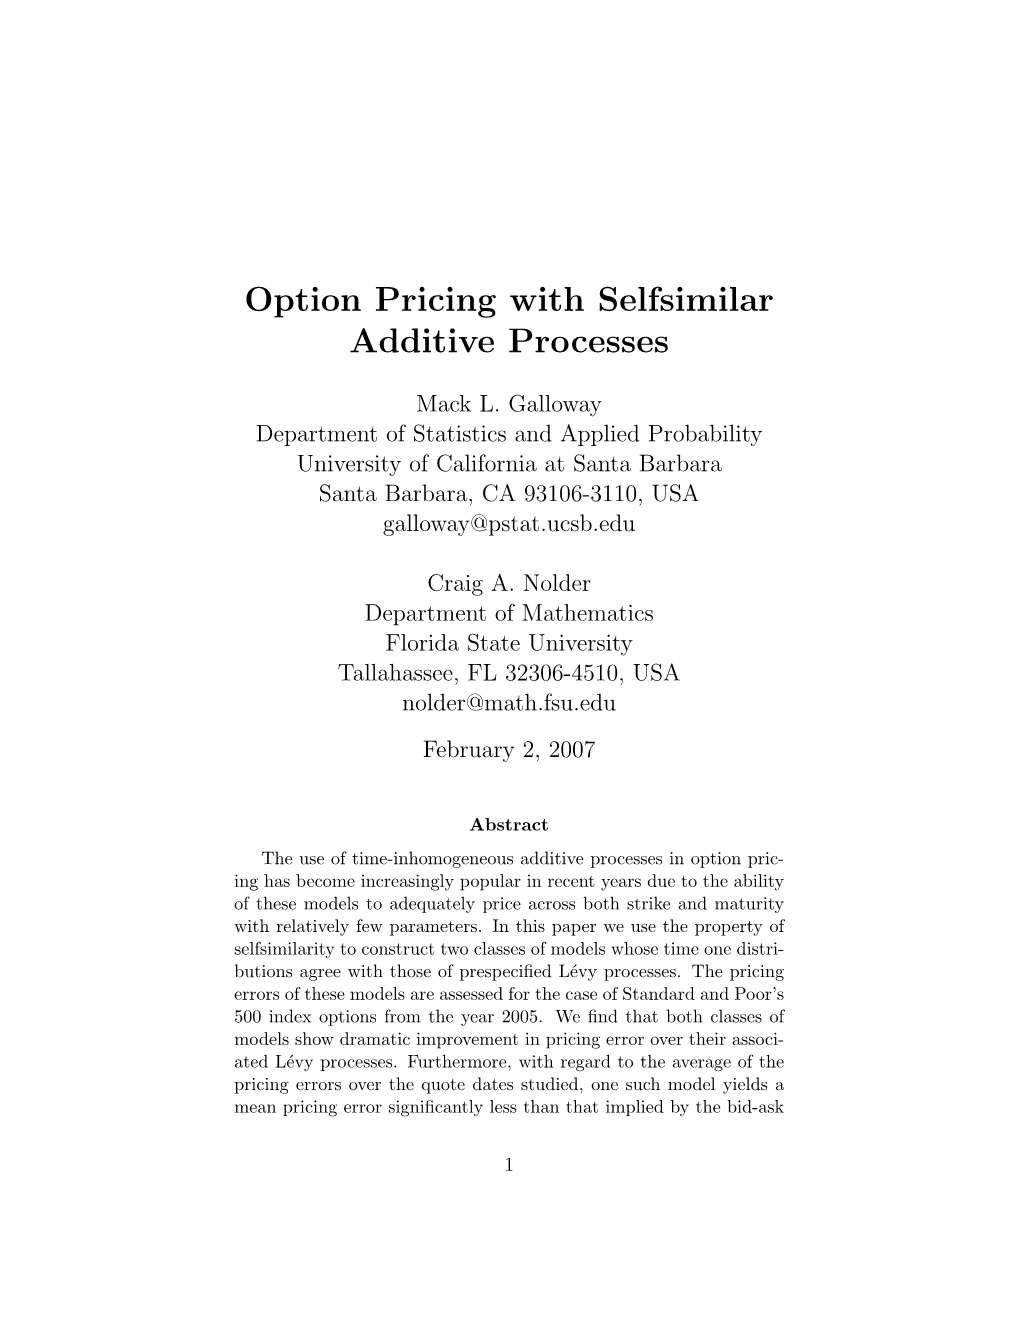 Option Pricing with Selfsimilar Additive Processes